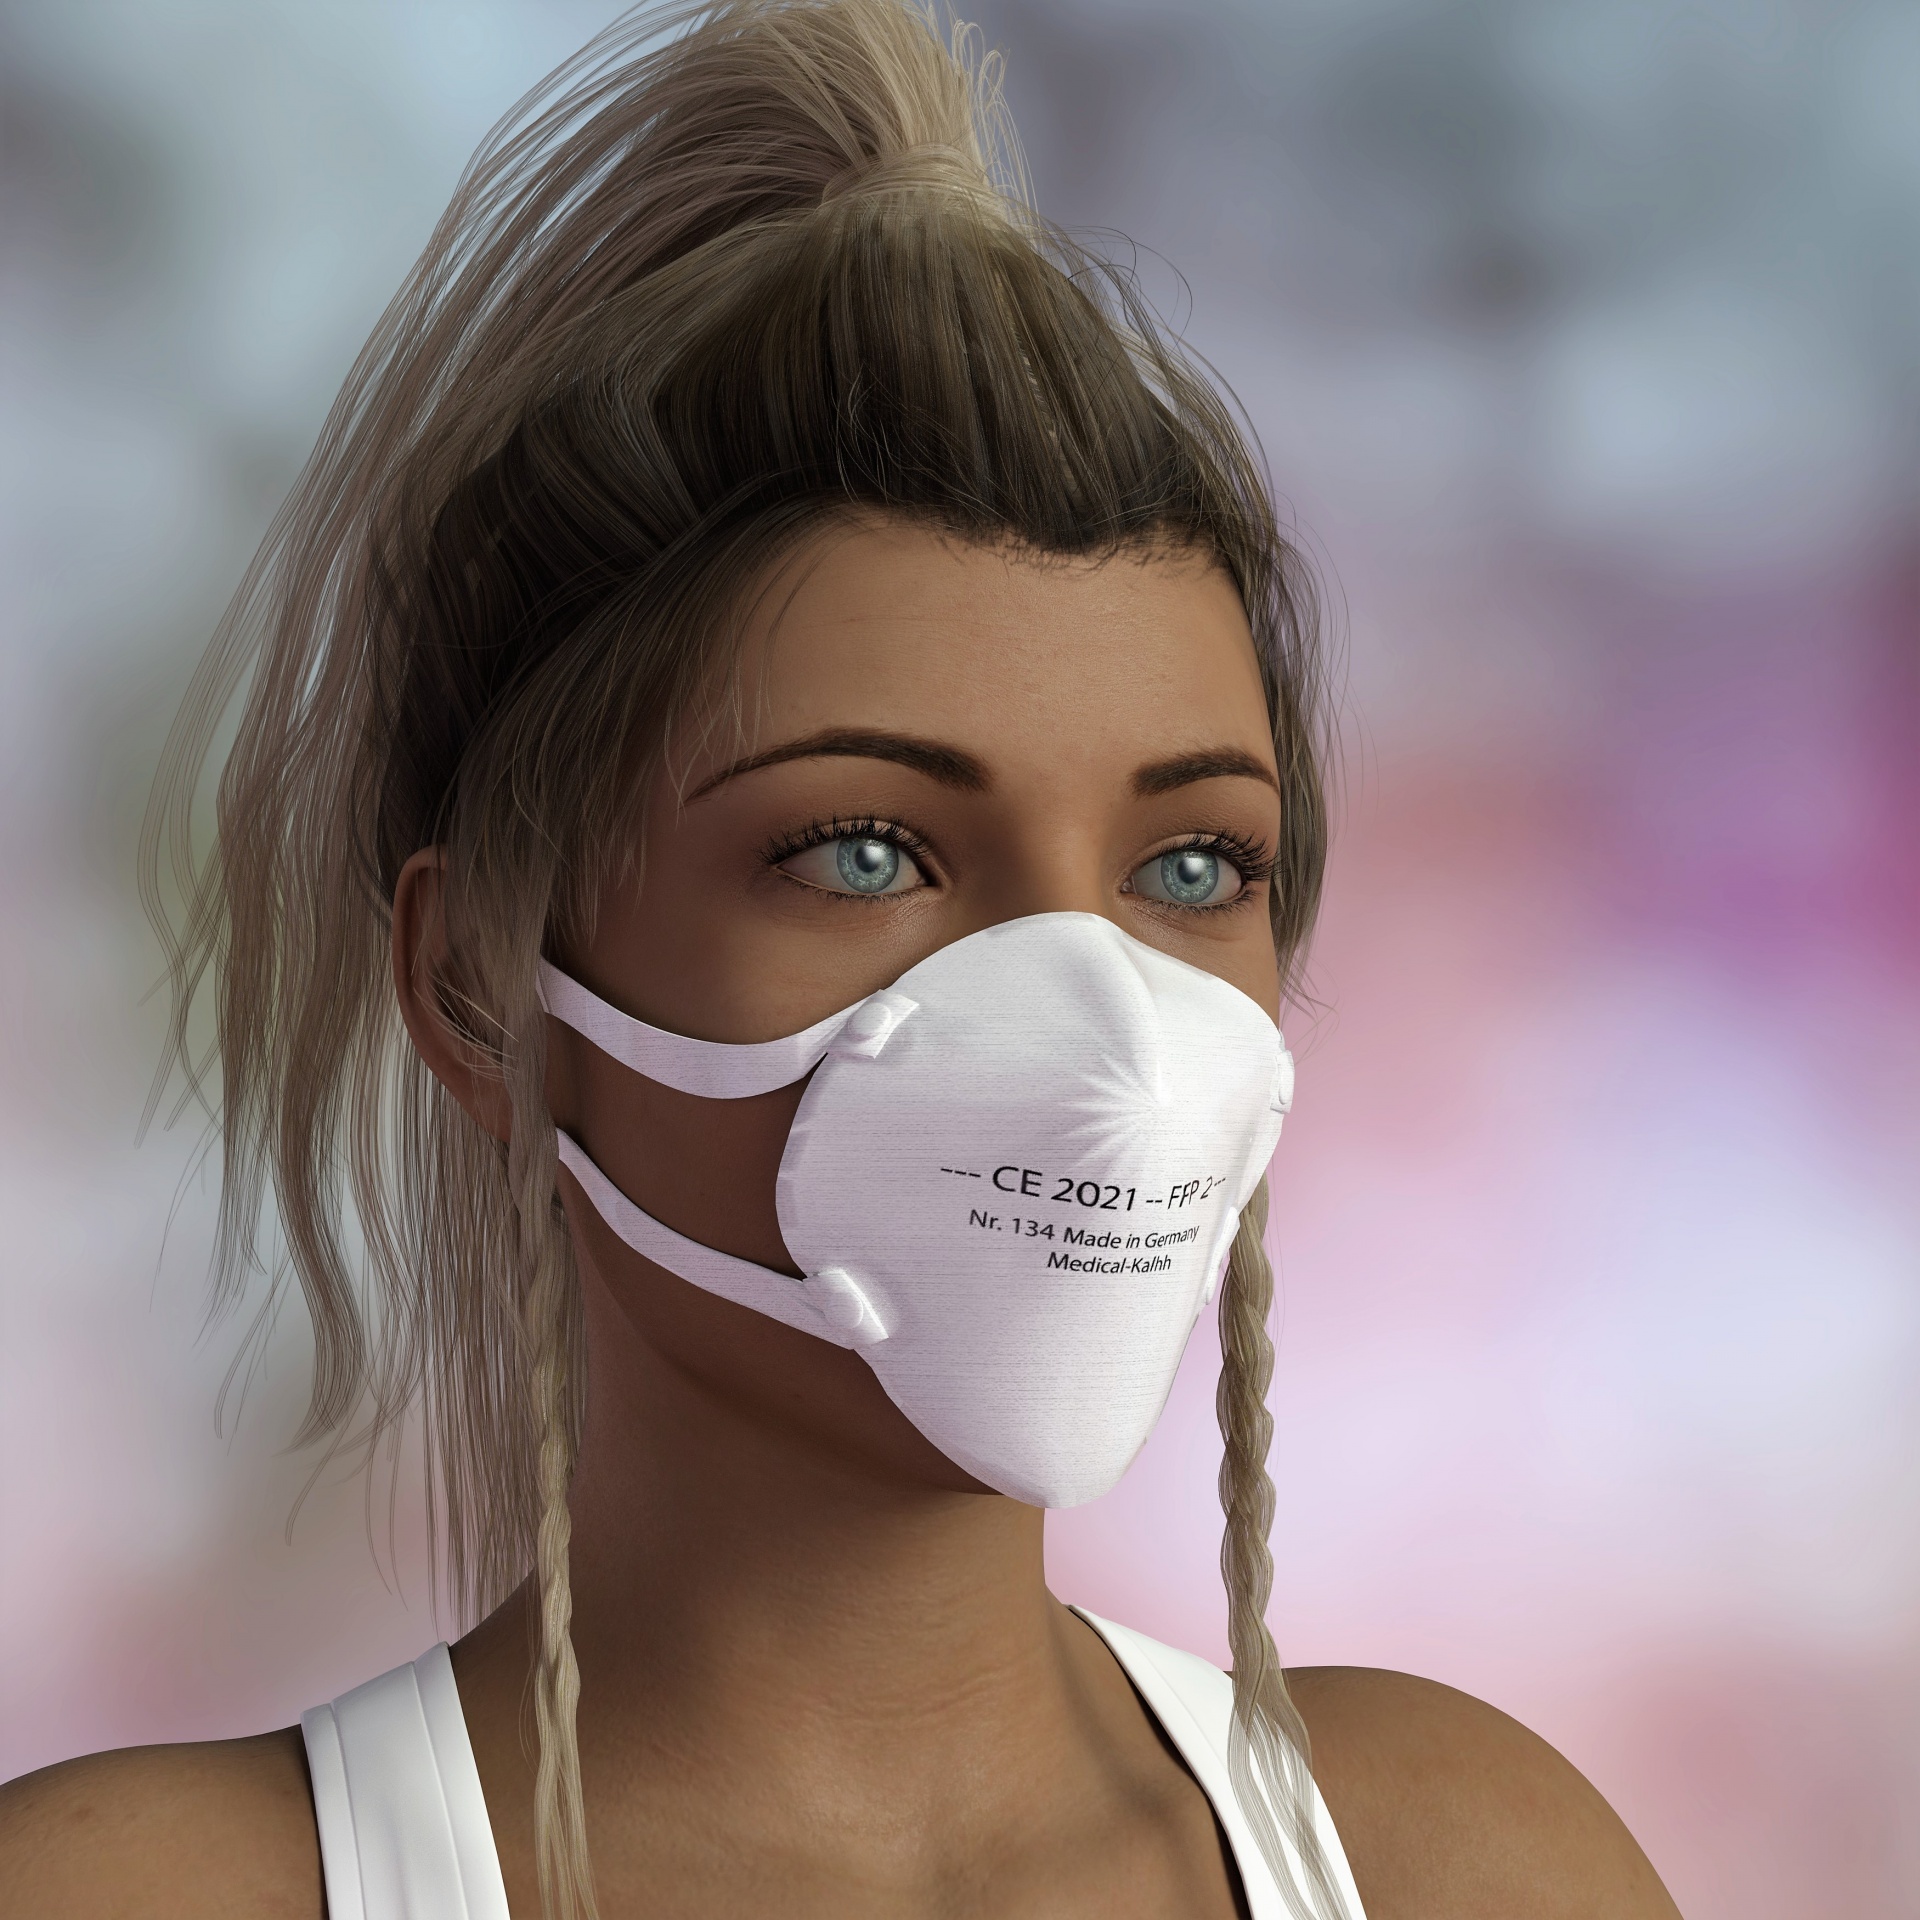 Woman with FFP2 mask